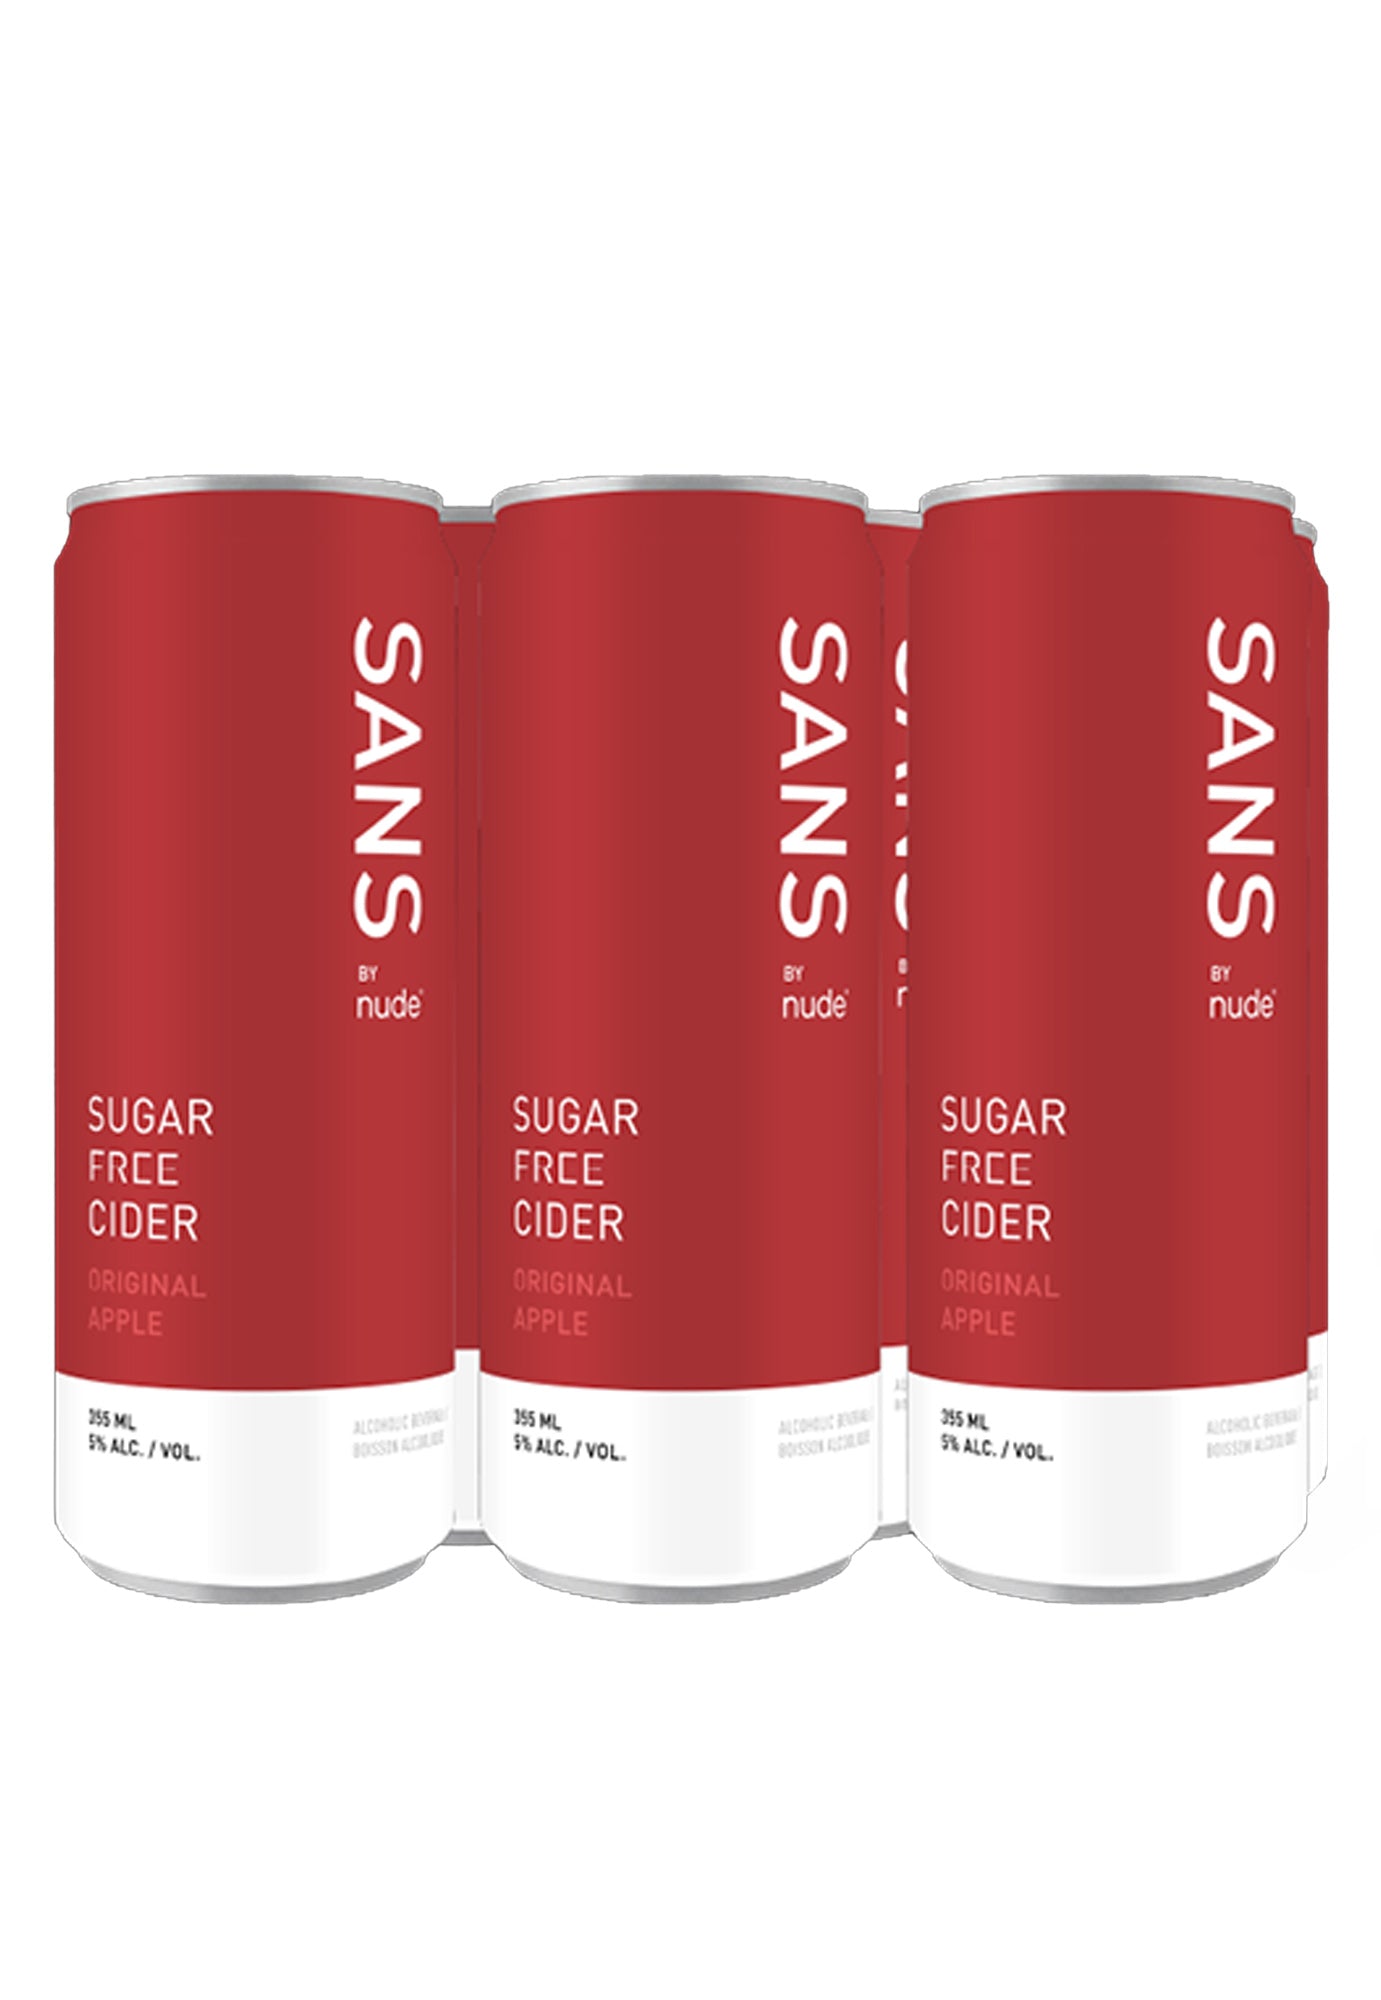 Sans Sugar Free Cider By Nude 355 ml - 6 Cans